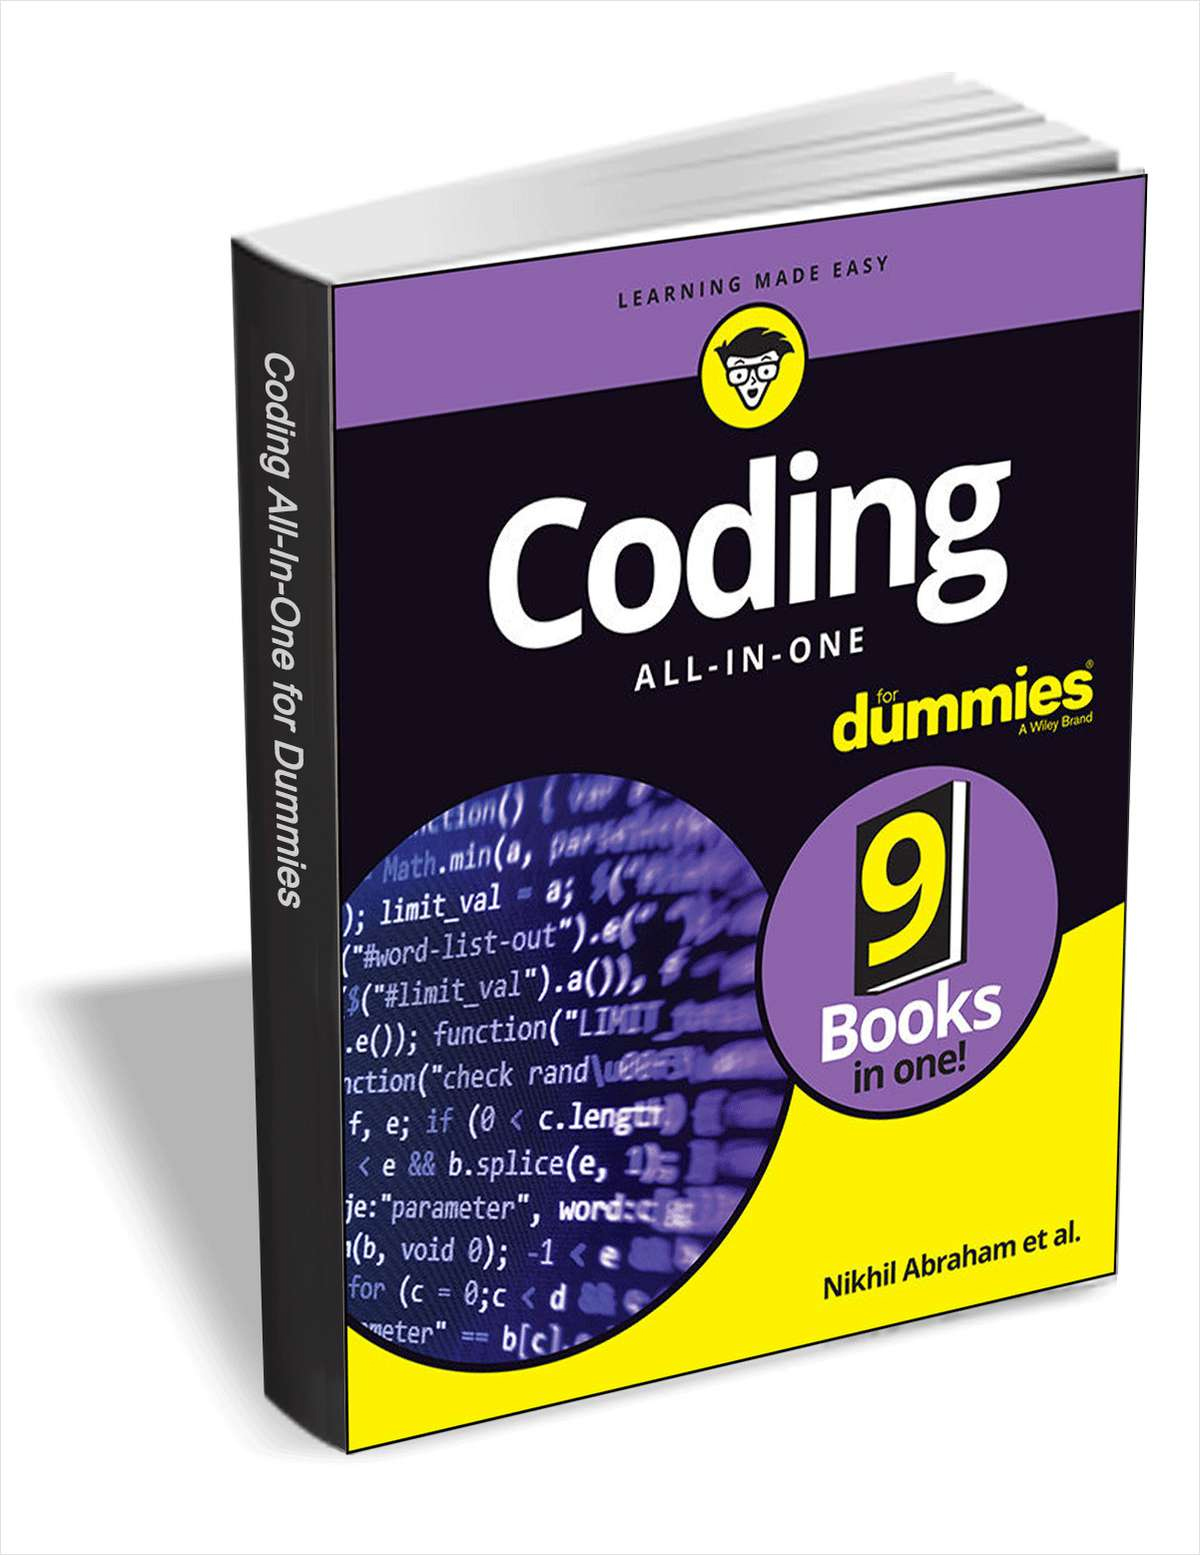 Coding All-in-One For Dummies ($17 Value) FREE For a Limited Time Screenshot